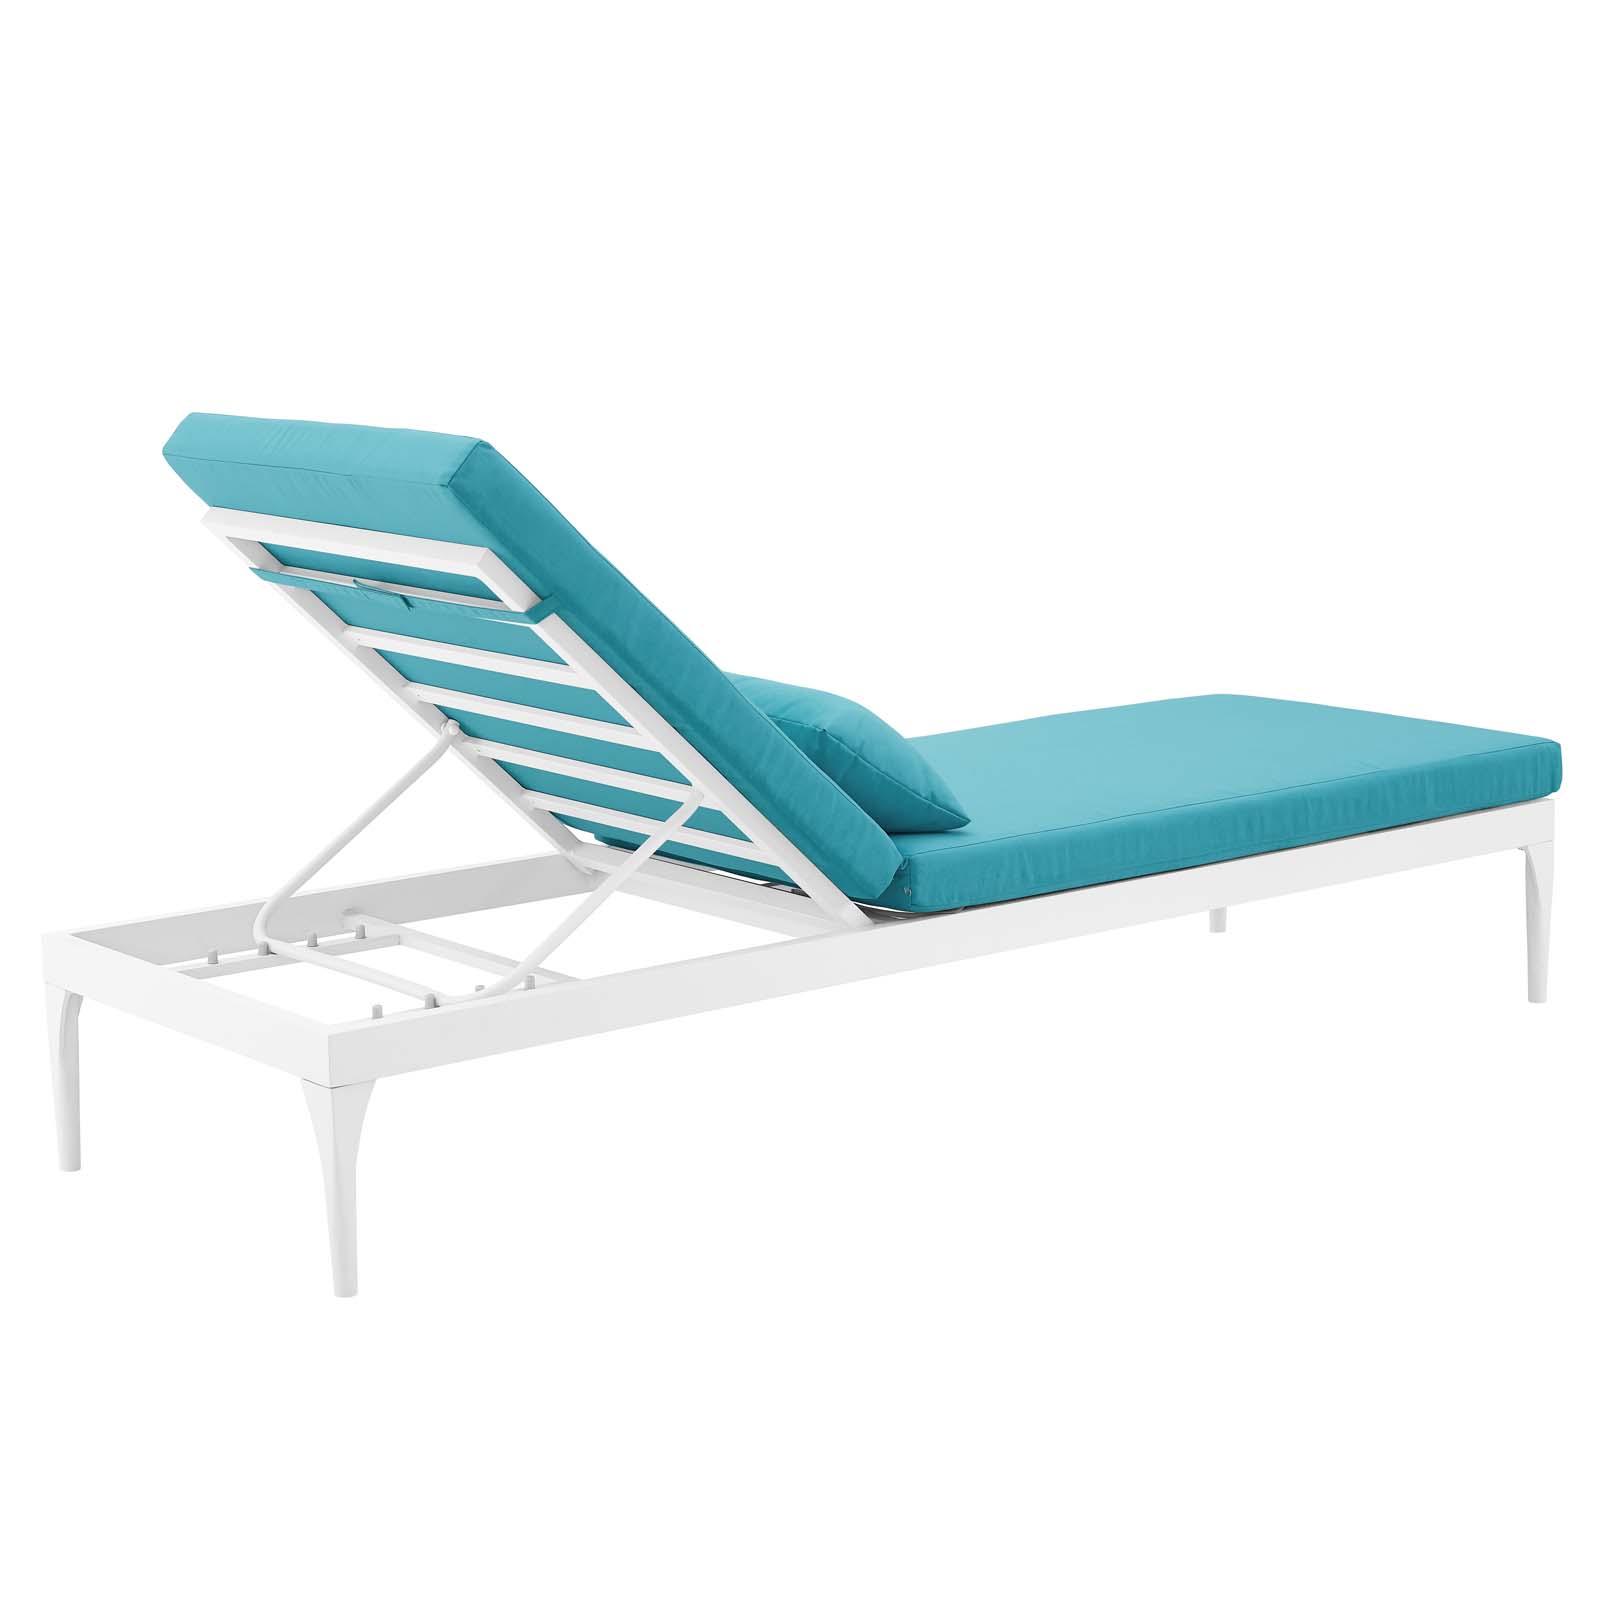 Modern Contemporary Urban Design Outdoor Patio Balcony Garden Furniture Lounge Chair Chaise, Fabric Metal Steel, White Blue - image 4 of 7